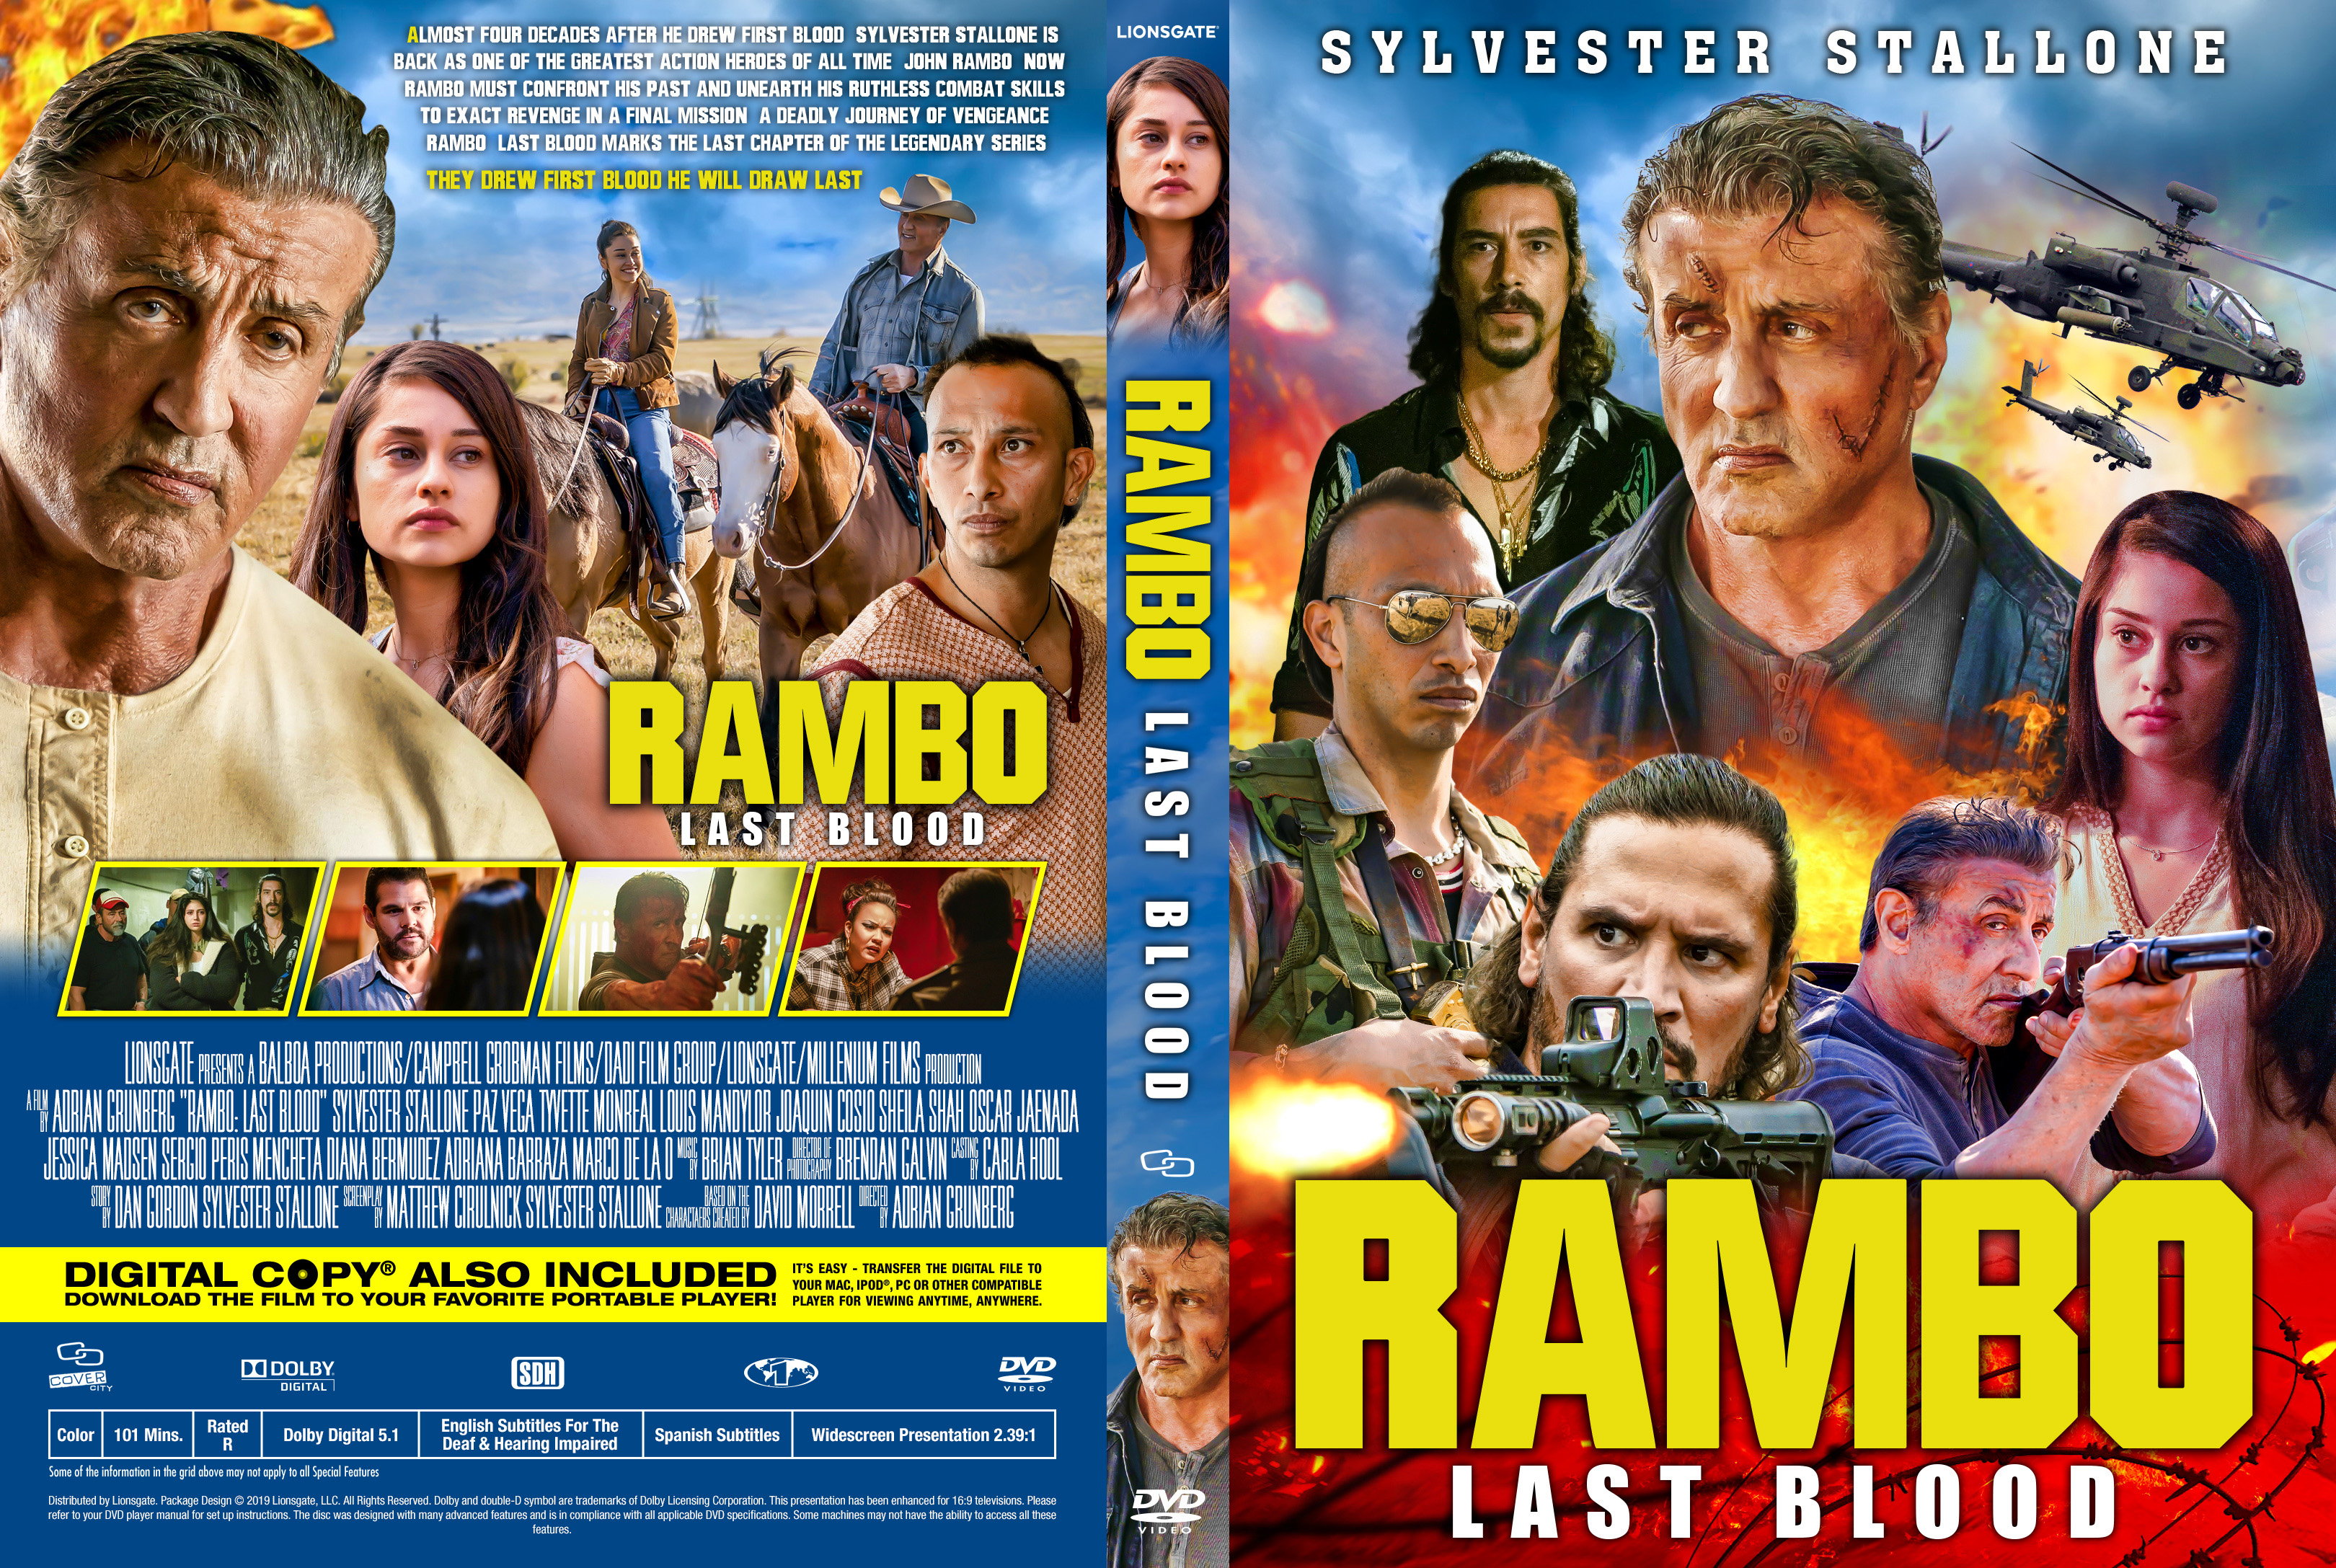 aIDS håndflade ånd COVERS.BOX.SK ::: Rambo last blood - high quality DVD / Blueray / Movie